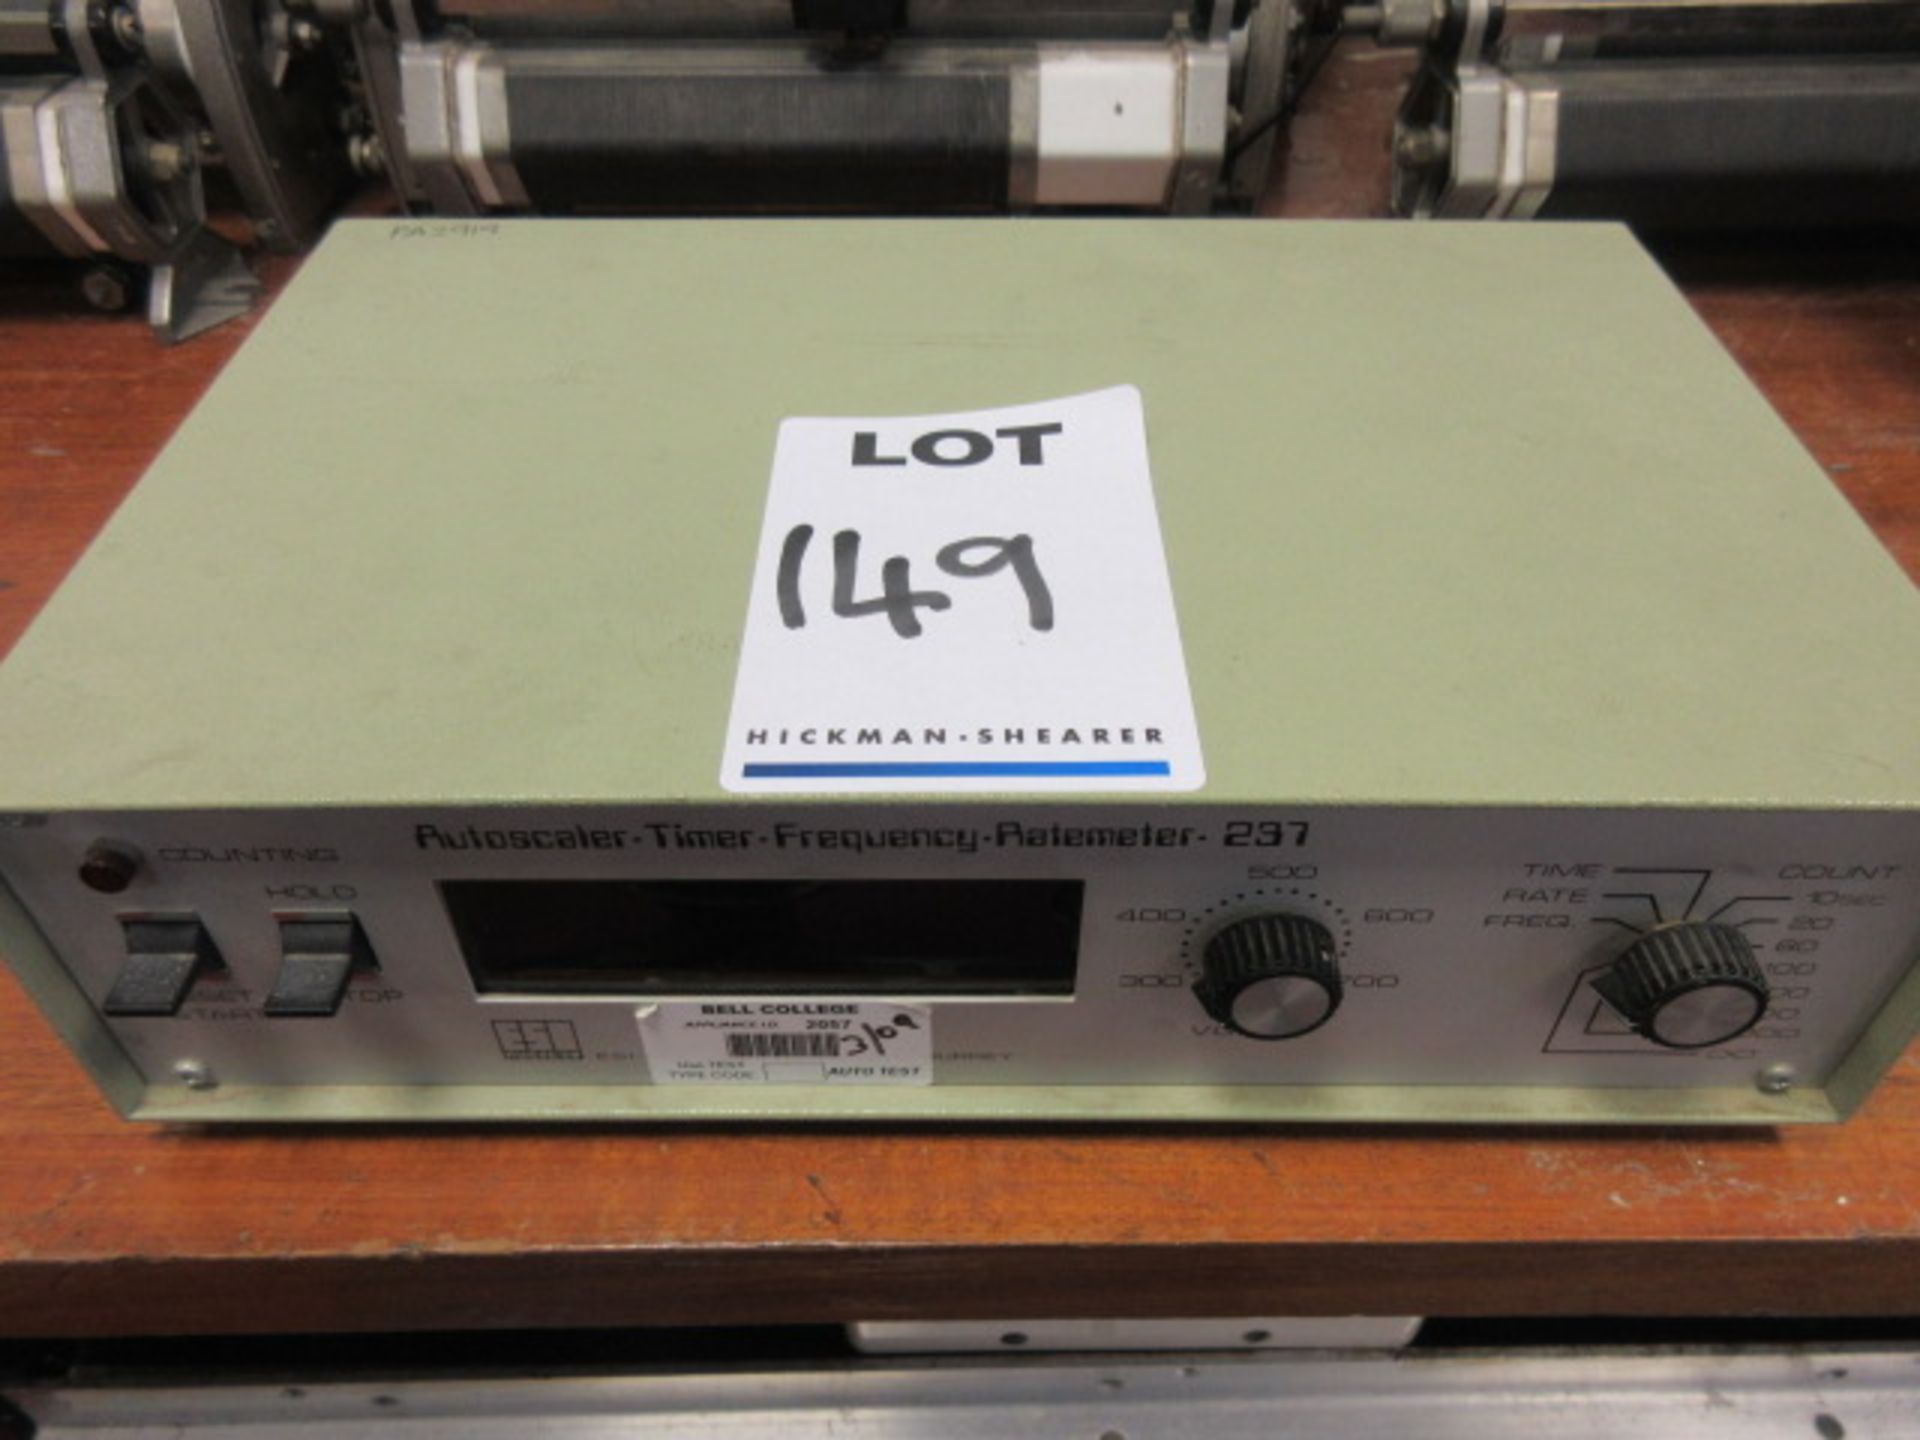 ESI NUCLEAR AUTOSCALE TIMER- FREQUENCY- RATEMETER 237. SN 1122 - Image 2 of 2